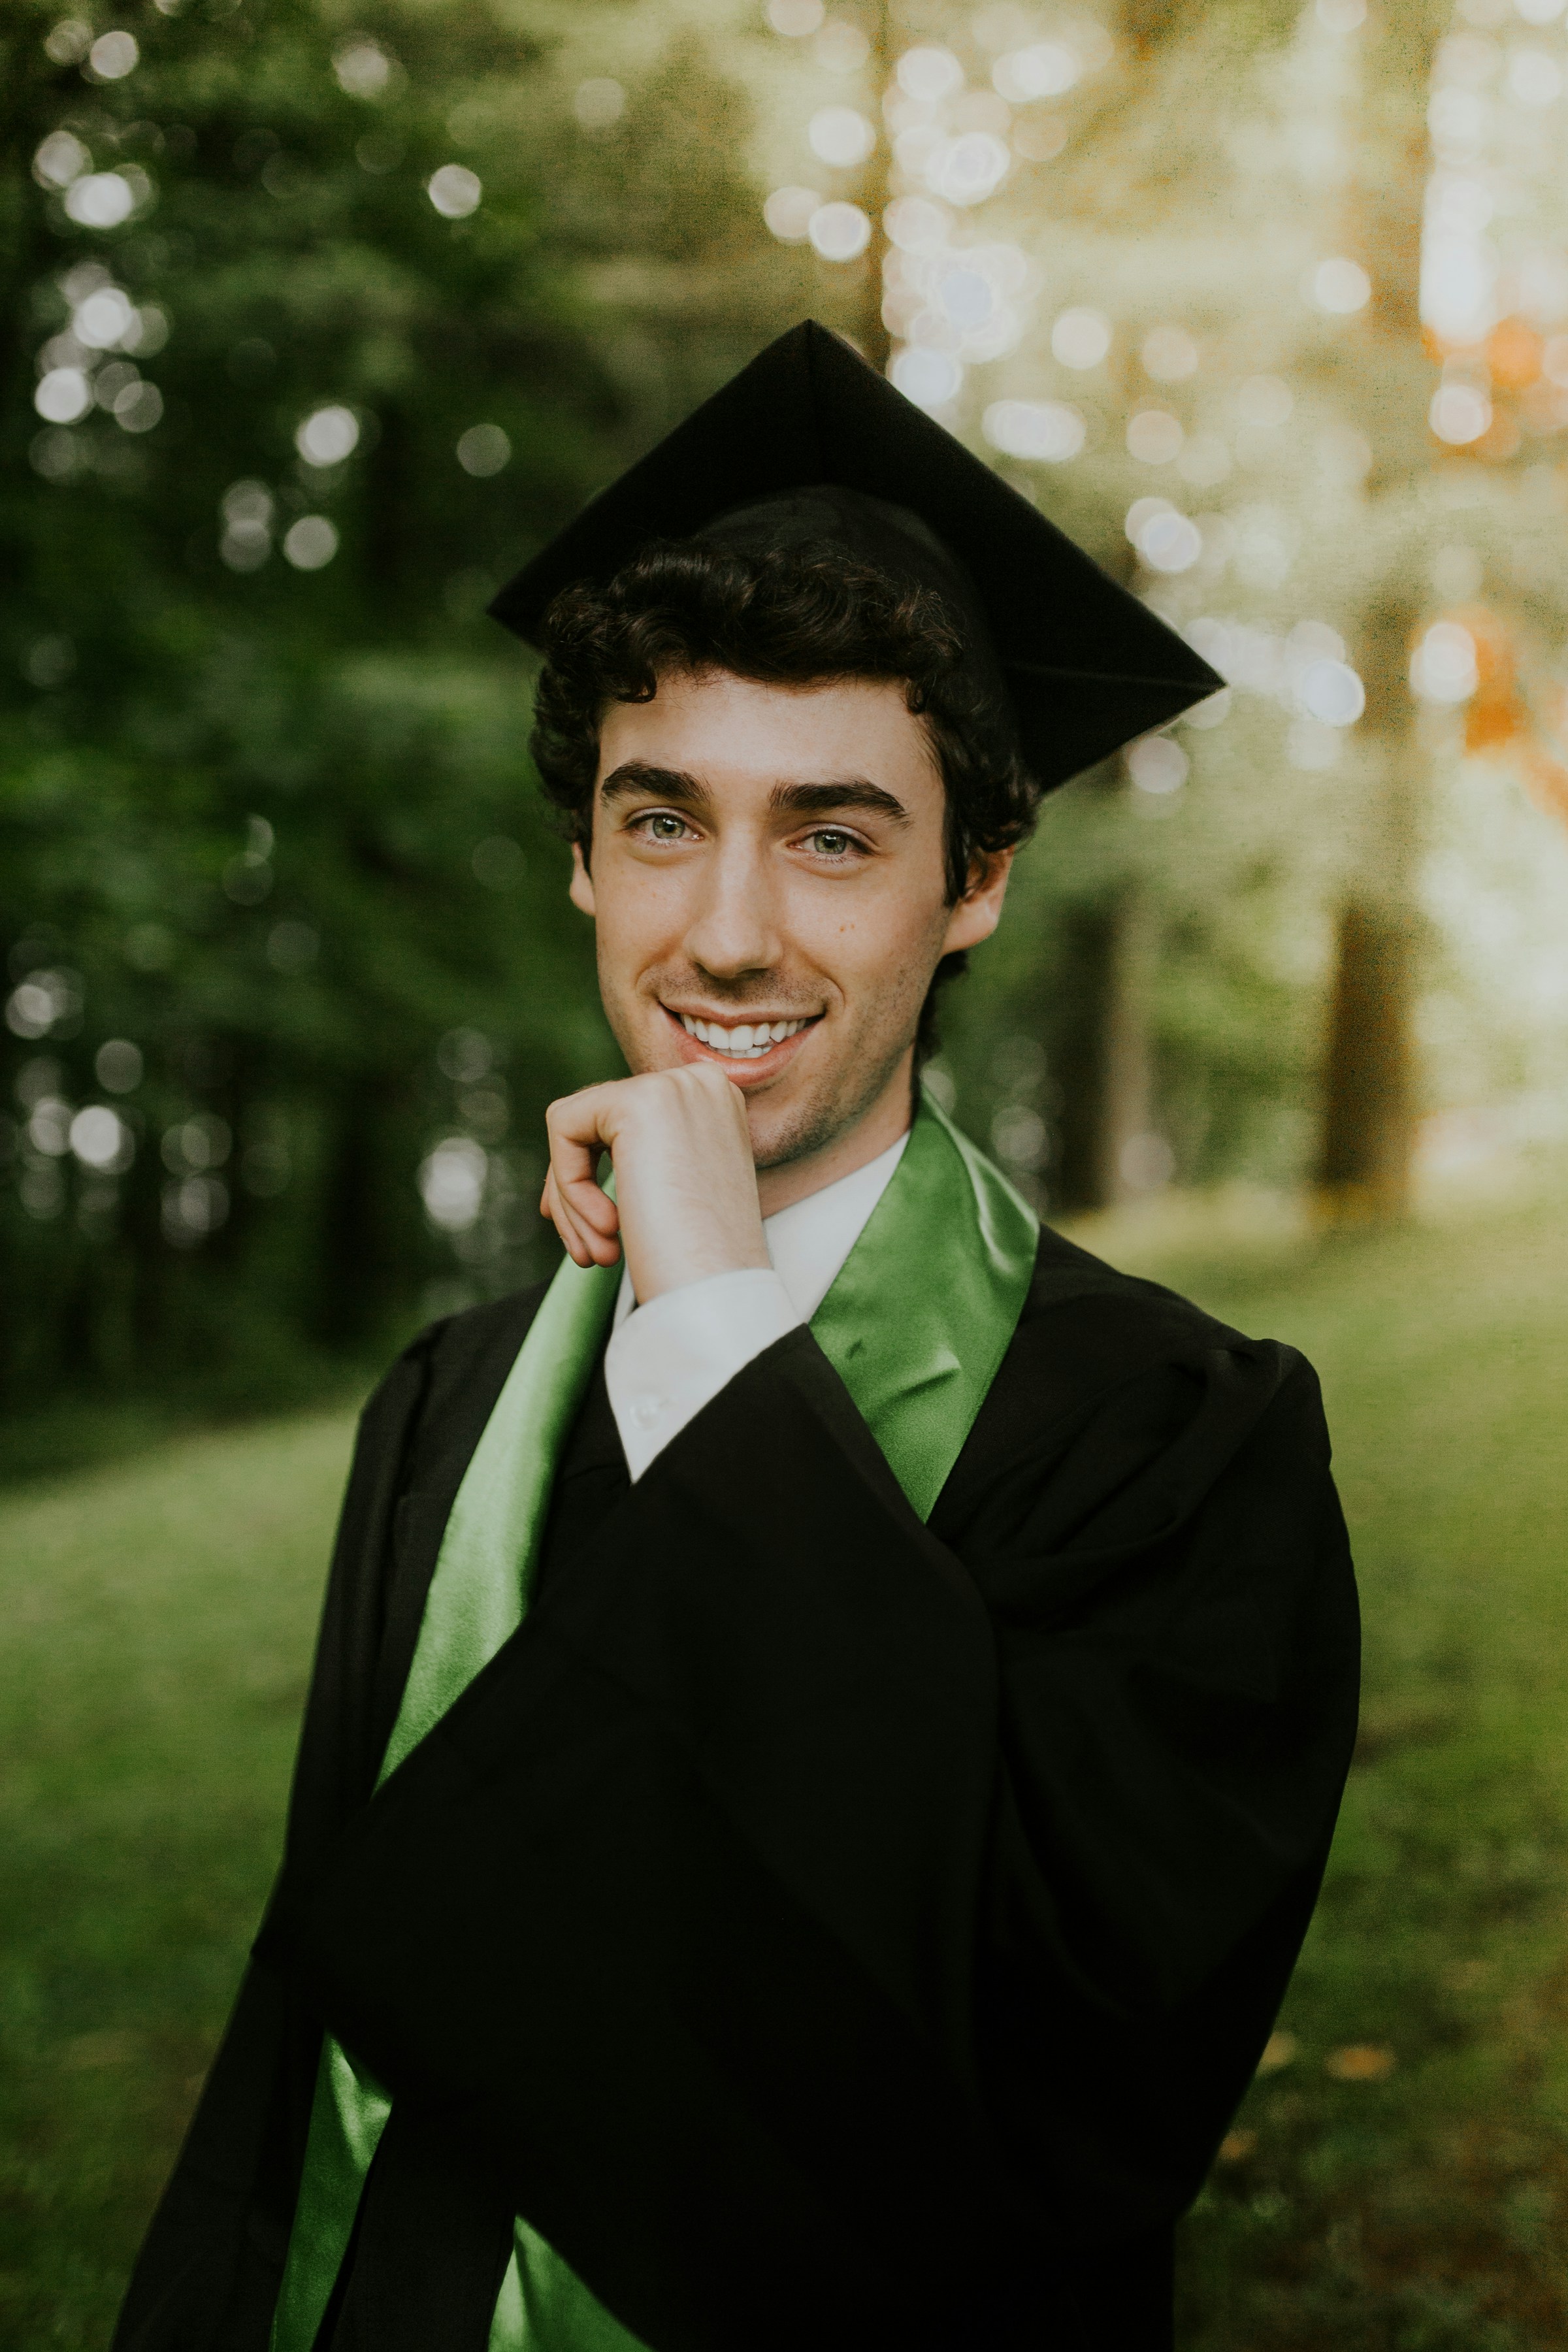 A smiling young guy in a graduation gown | Source: Unsplash